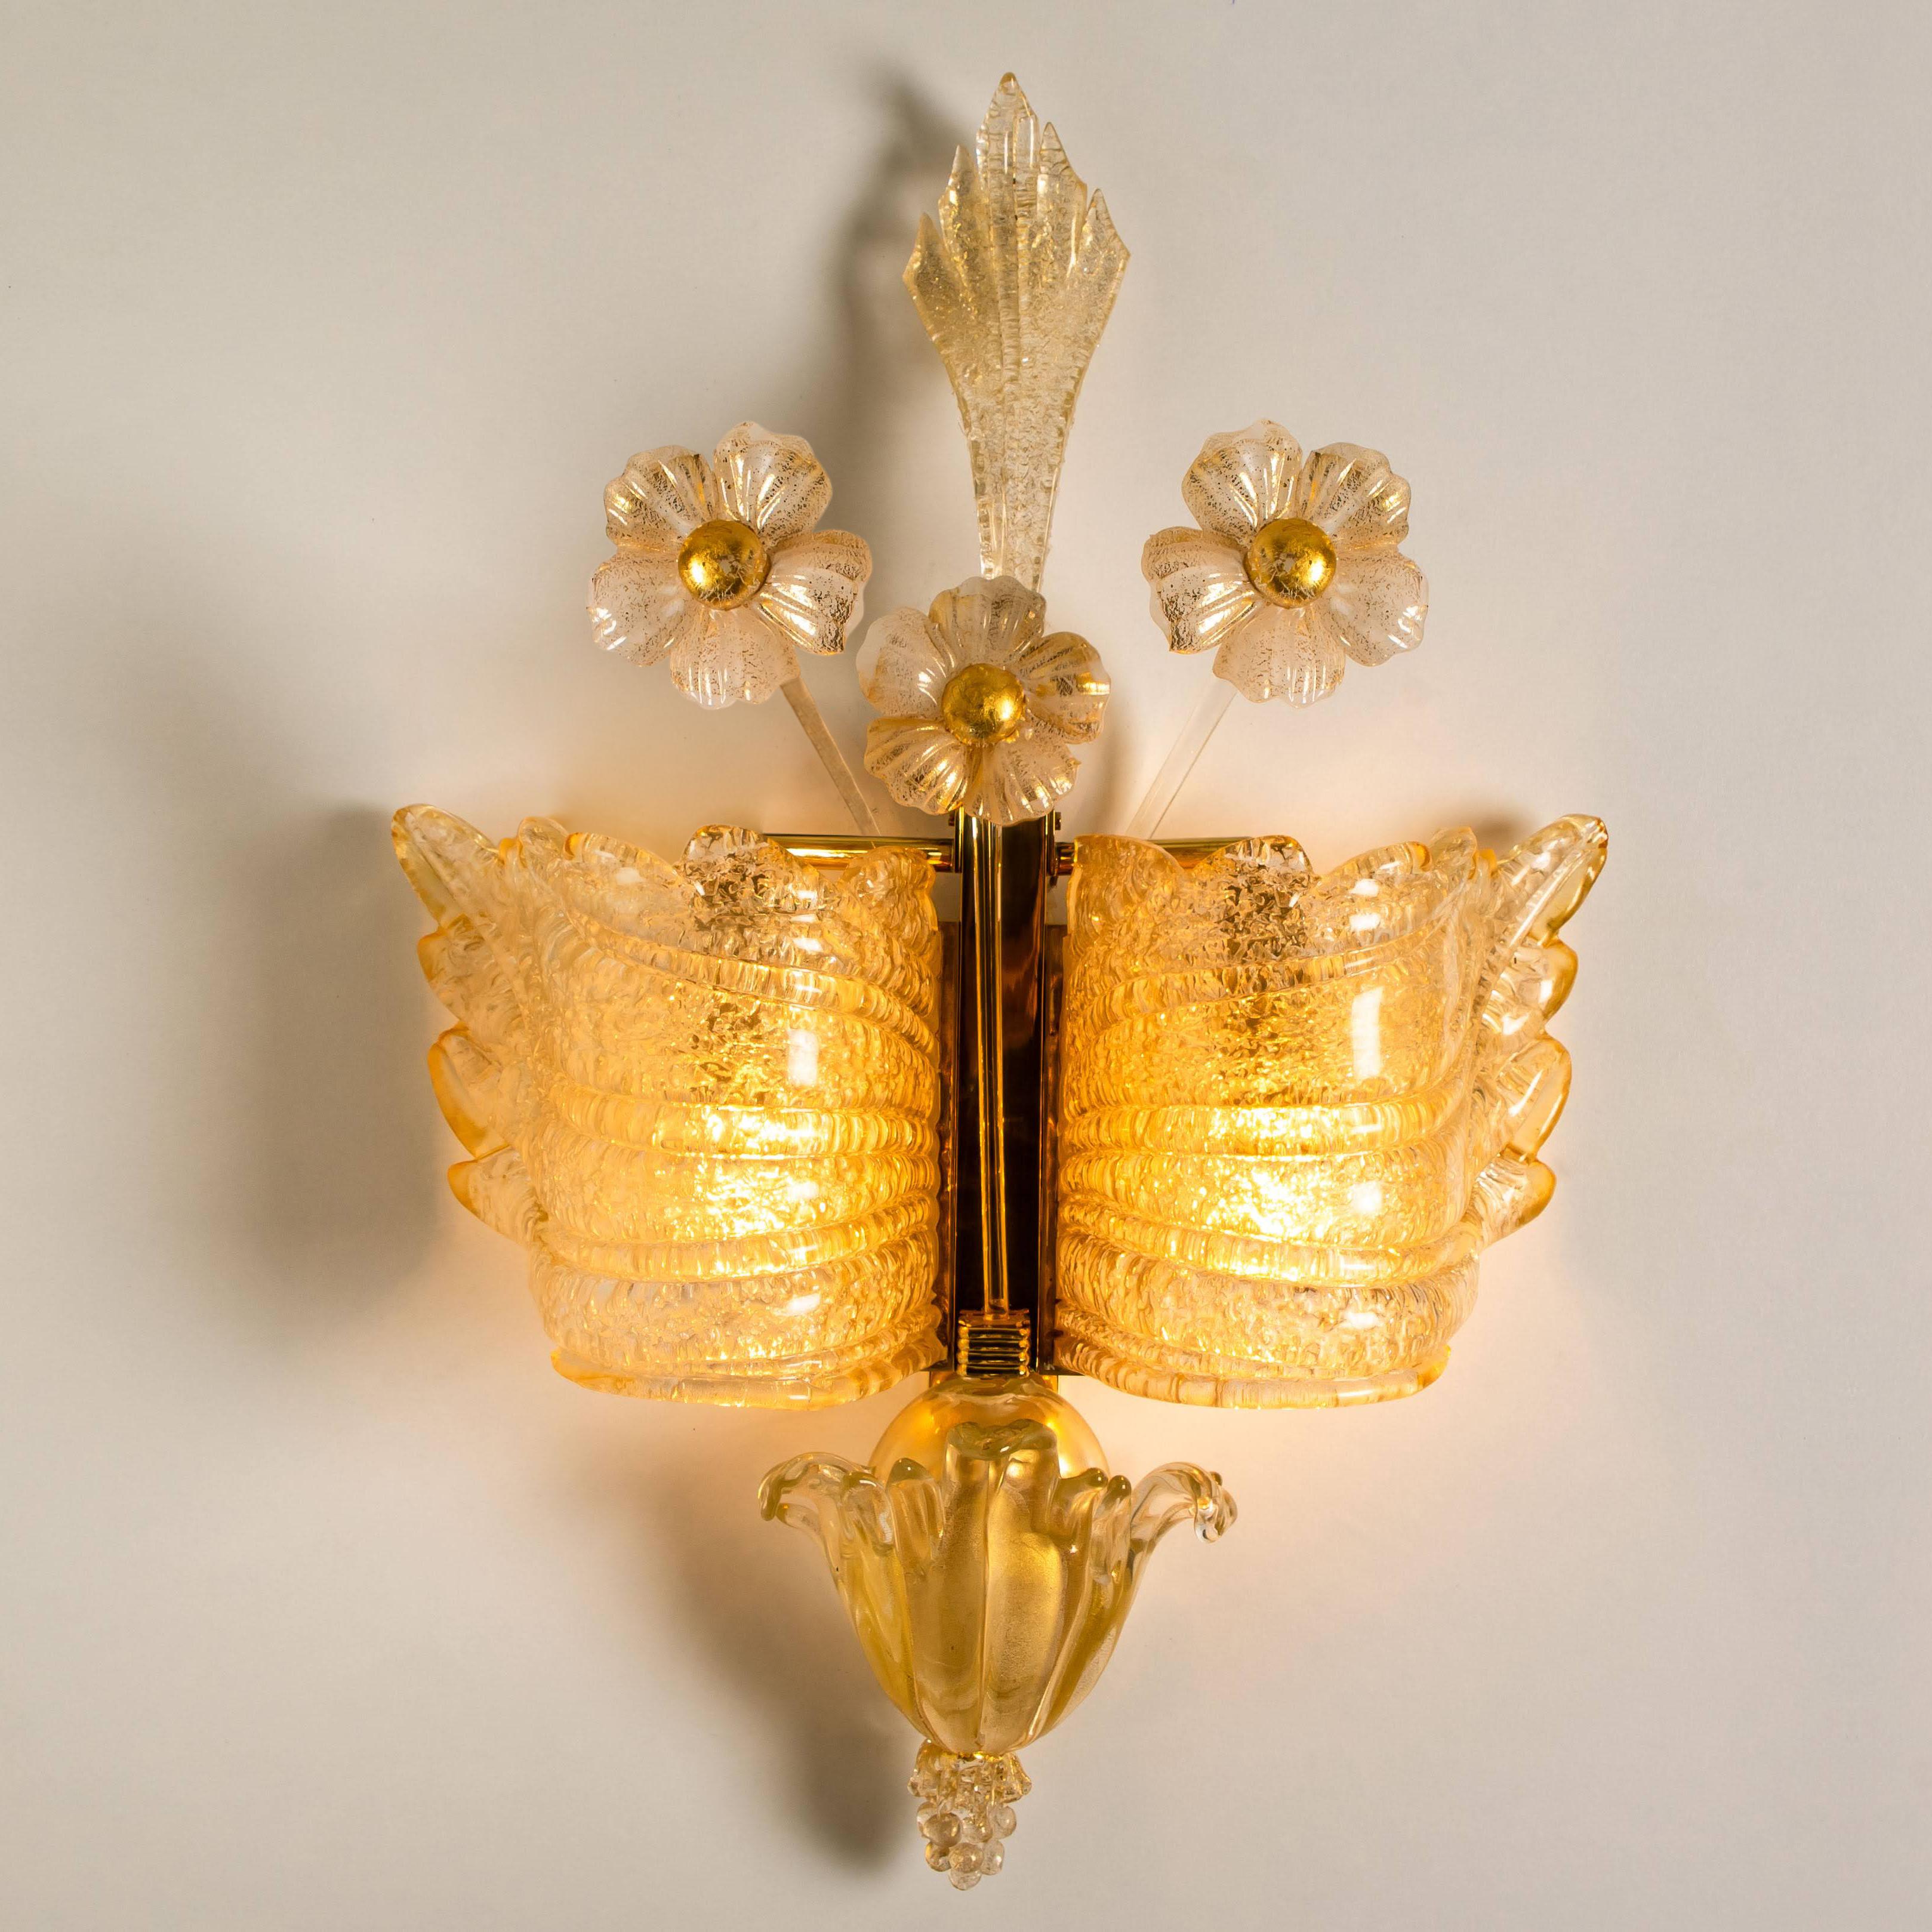 Pair of Stunning Huge Extra Large Wall Lights by Barovier & Toso, Italy For Sale 2